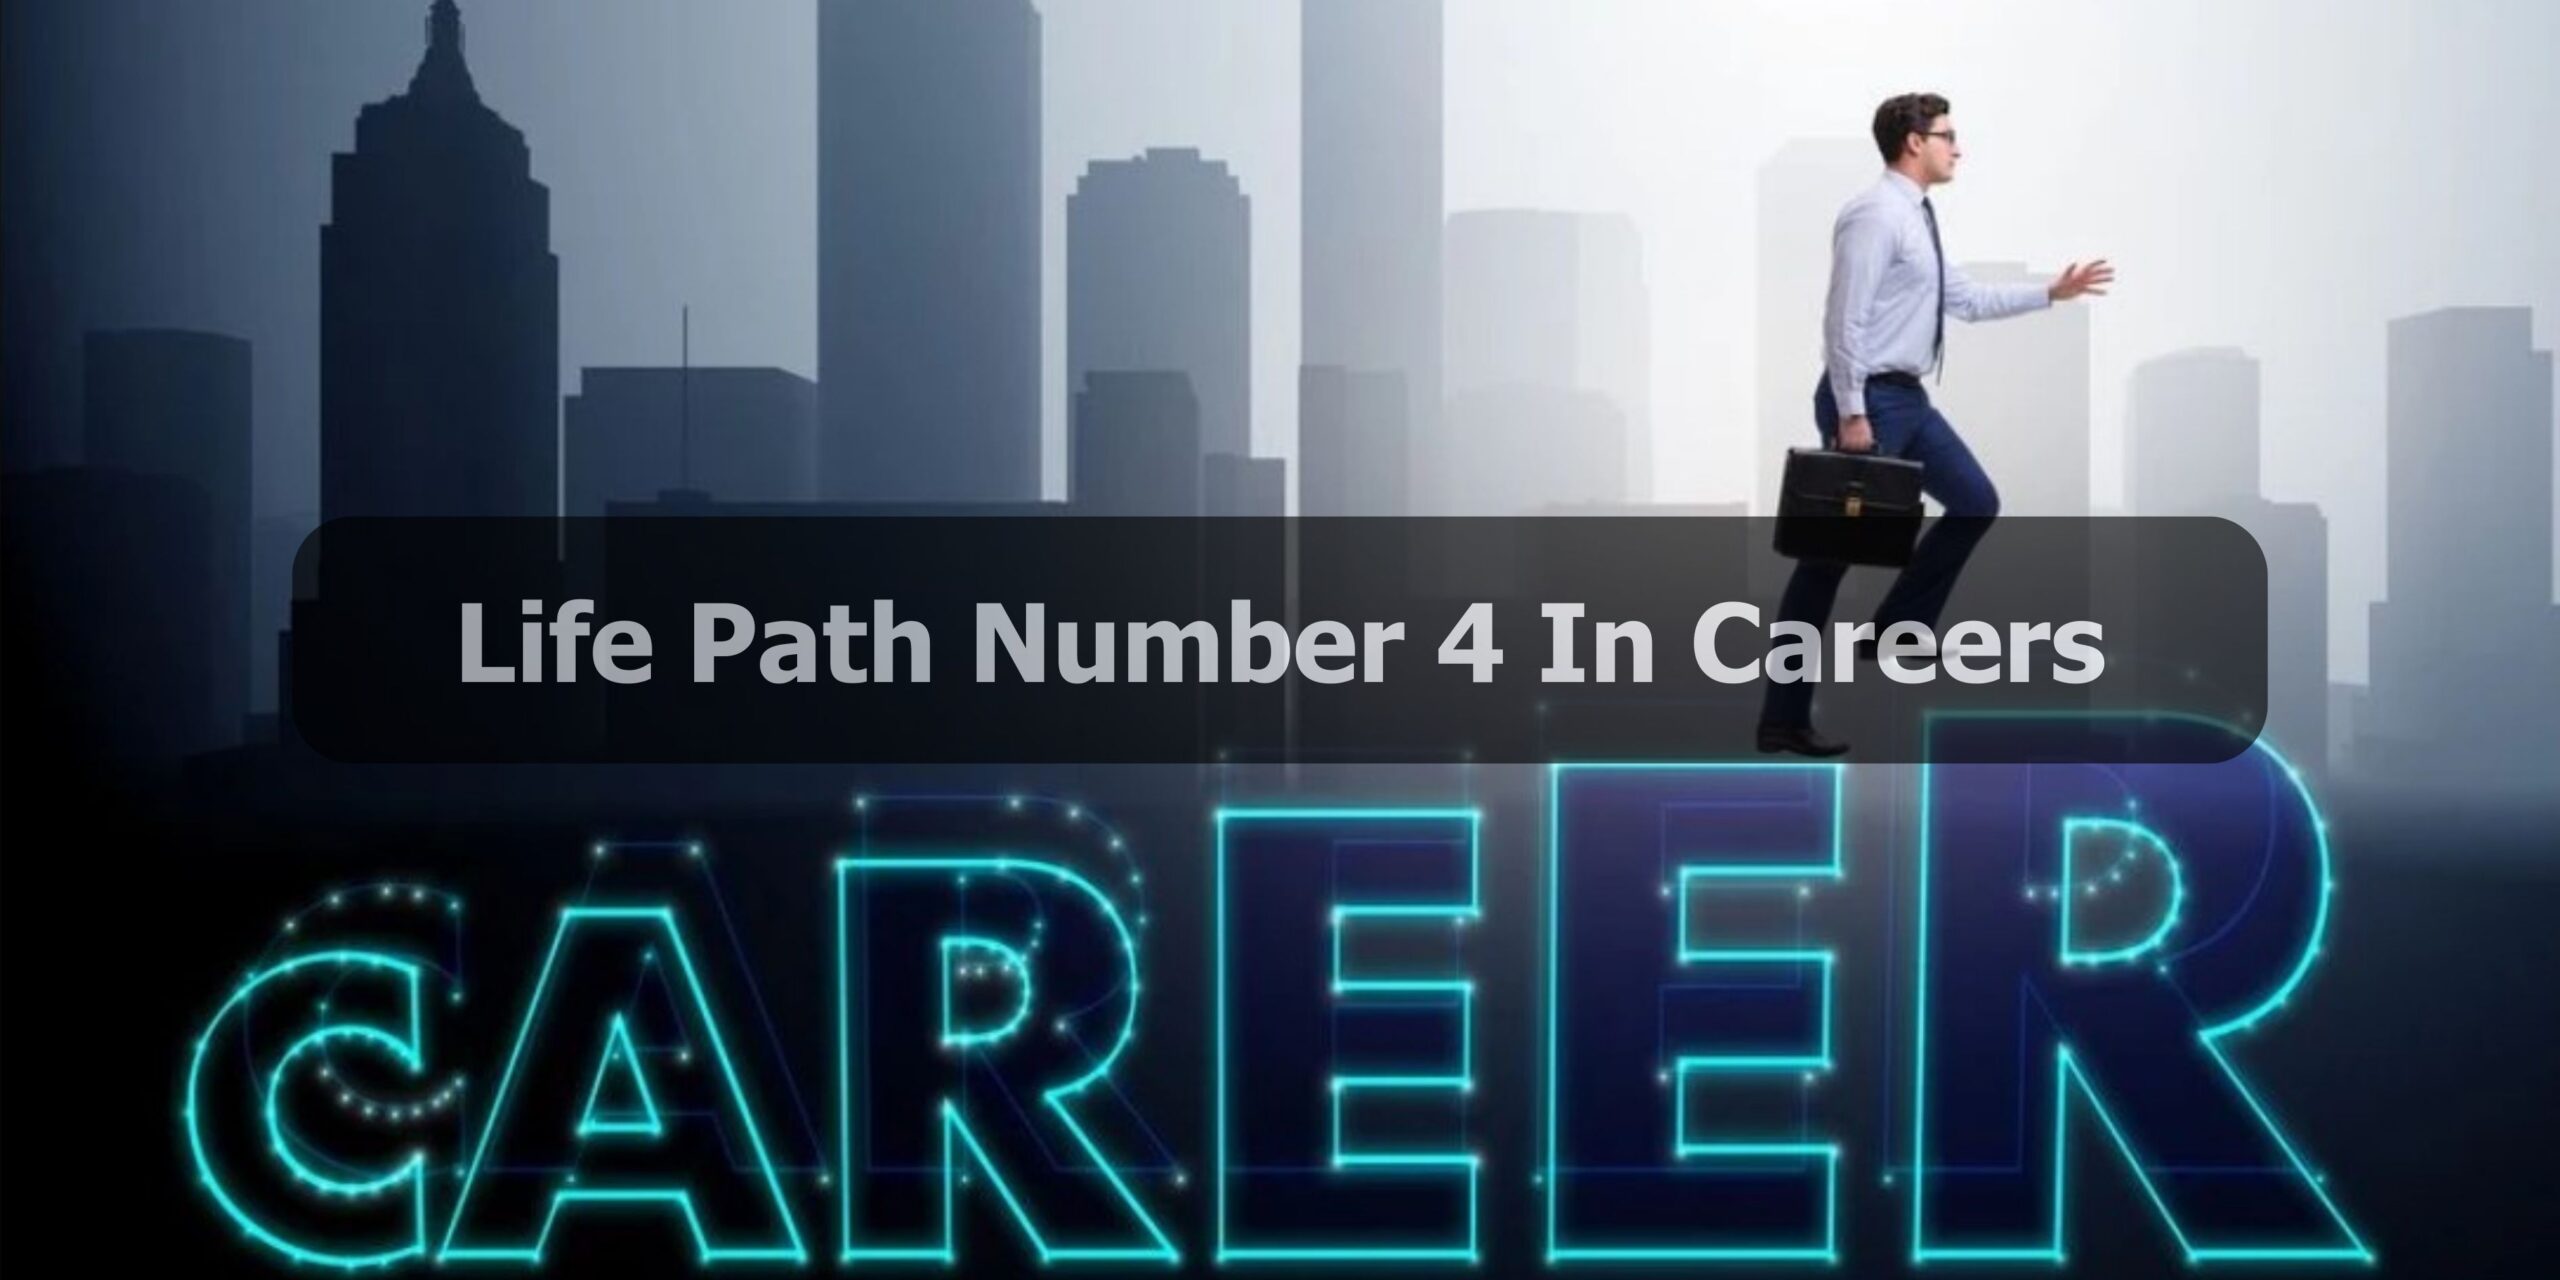 Life Path Number 4 In Careers